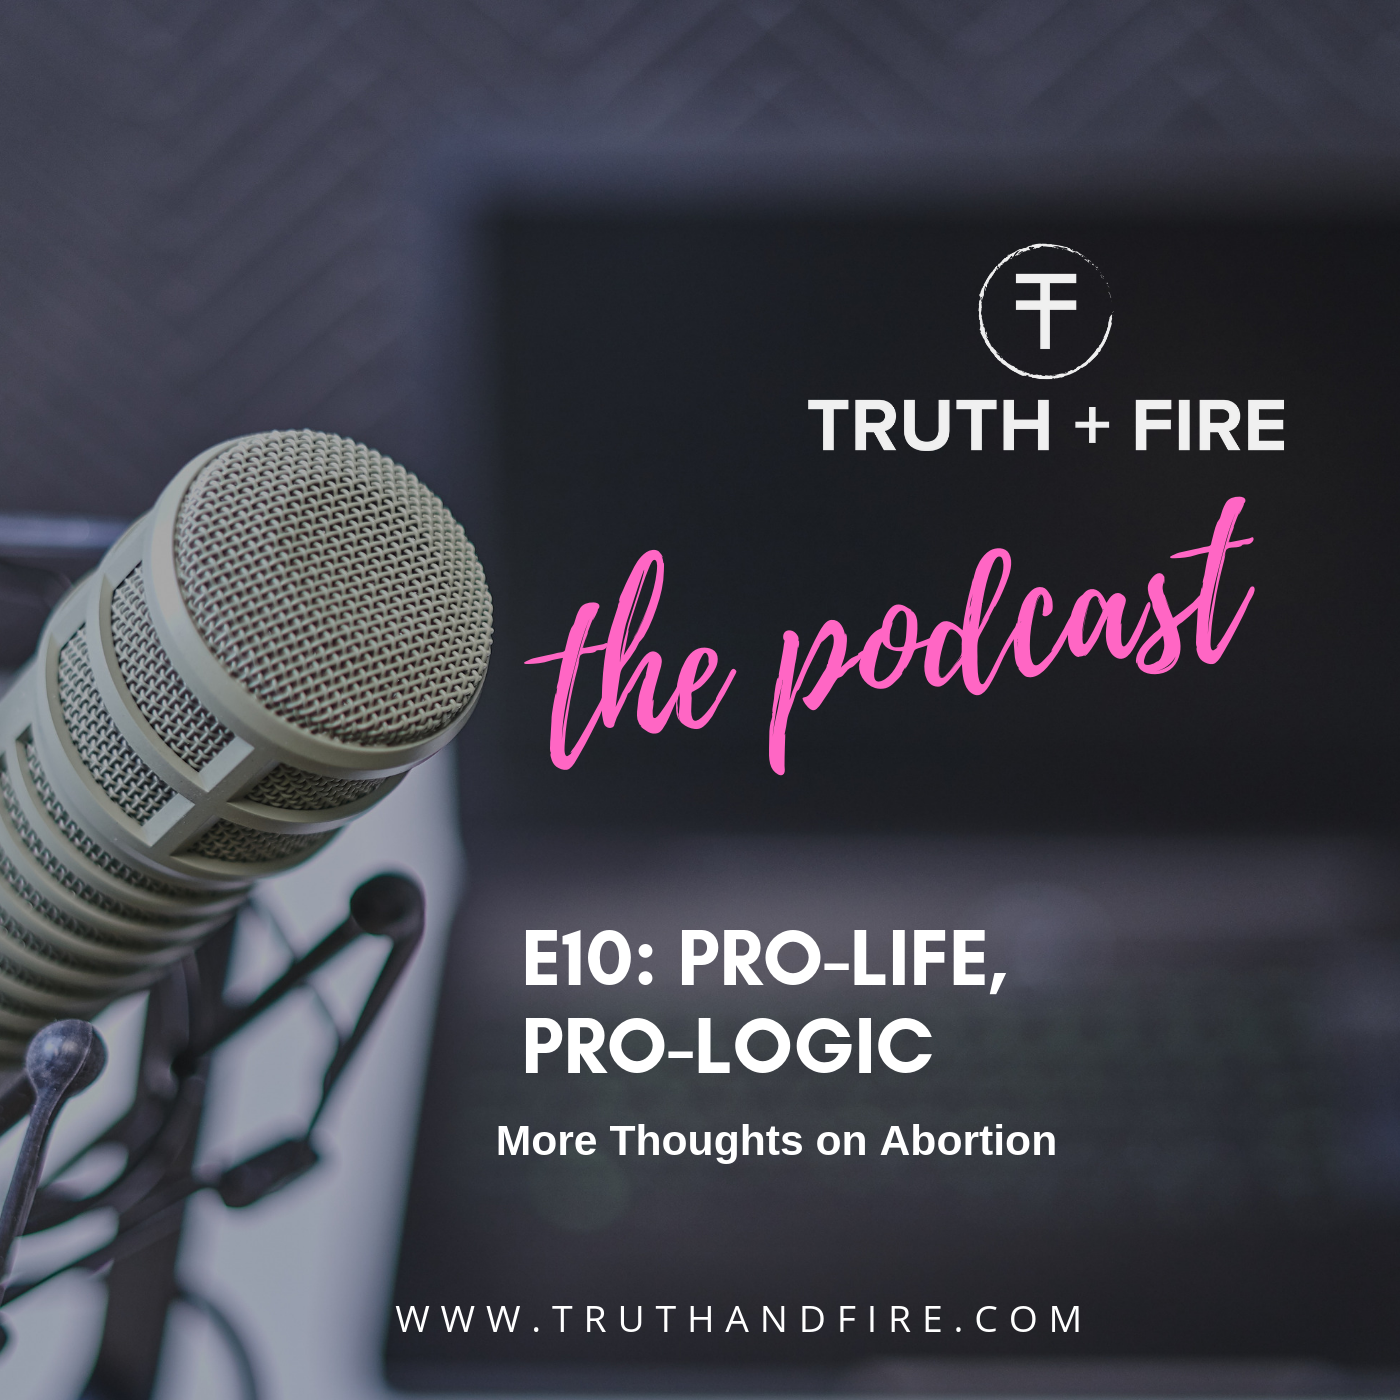 E10: Pro-Life, Pro-Logic: More Thoughts on Abortion